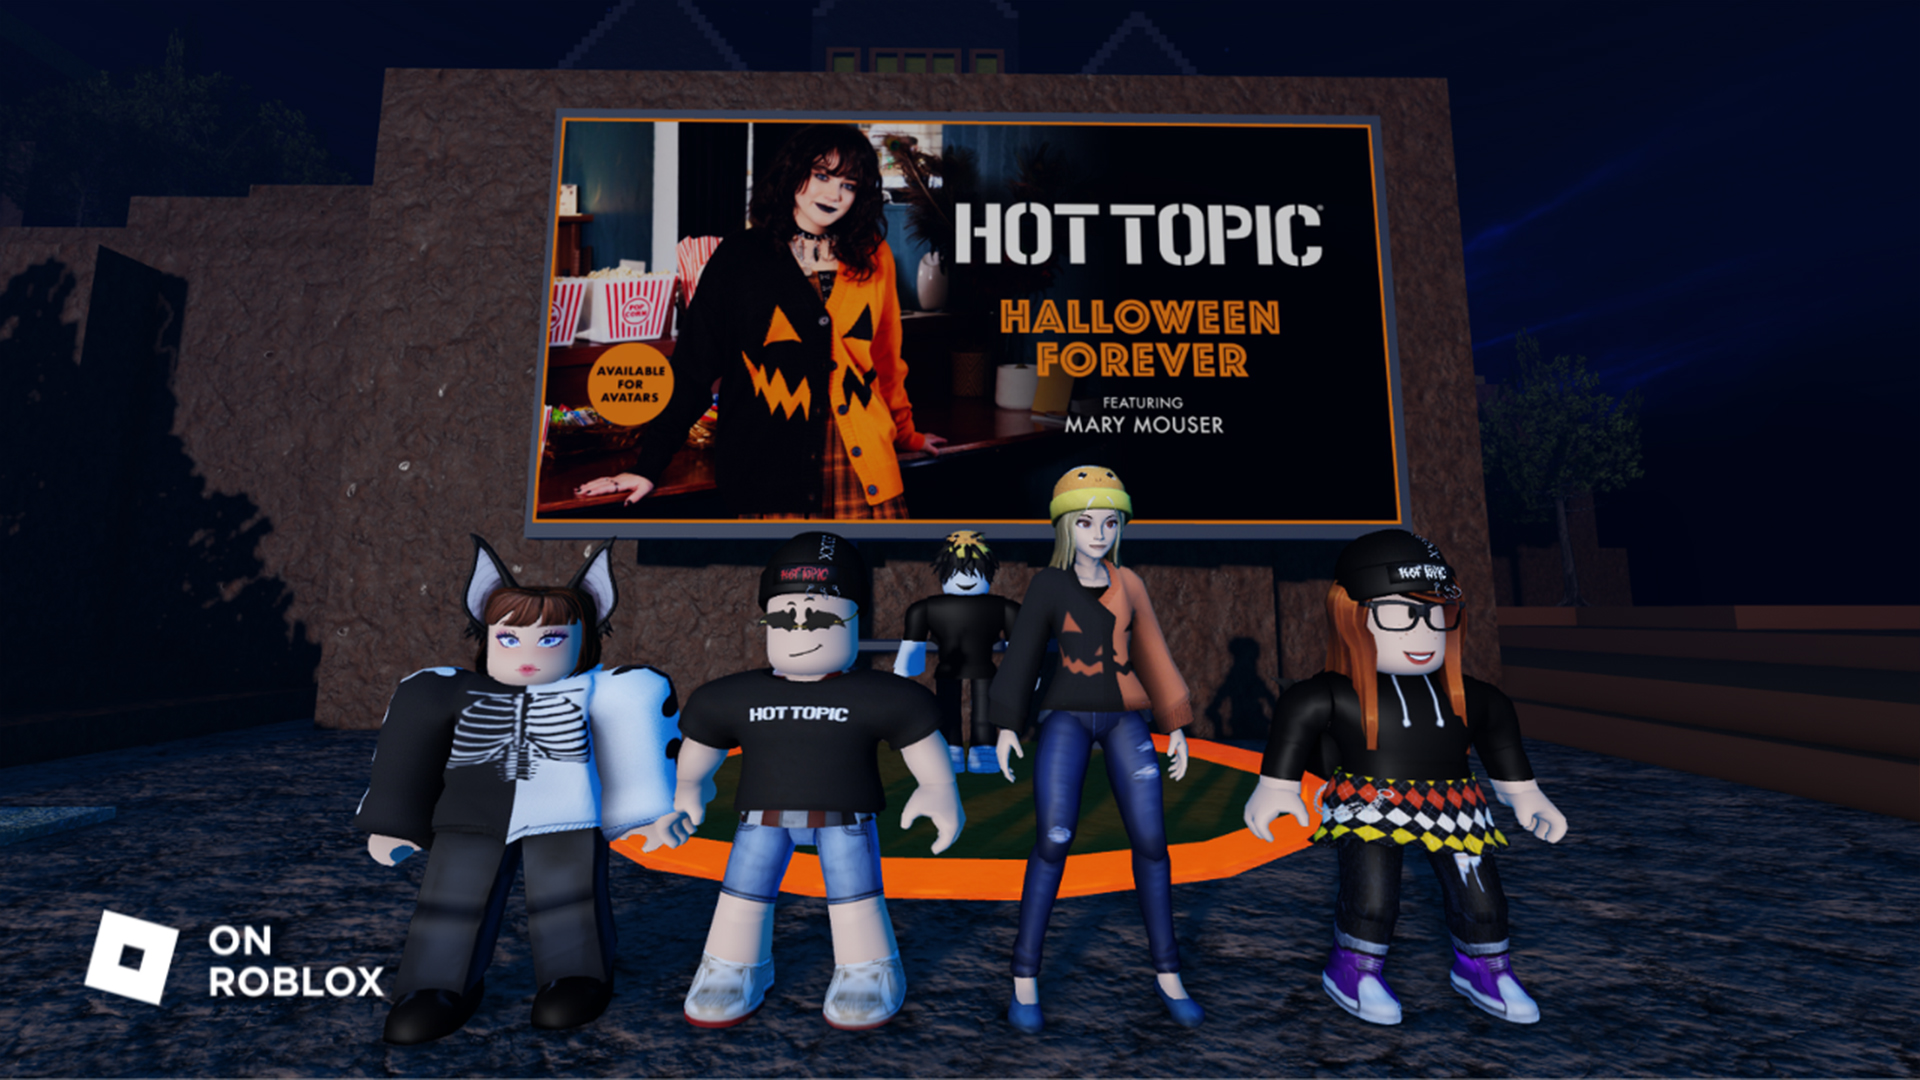 I Used Roblox Skins To Cheat In Fashion Shows! 